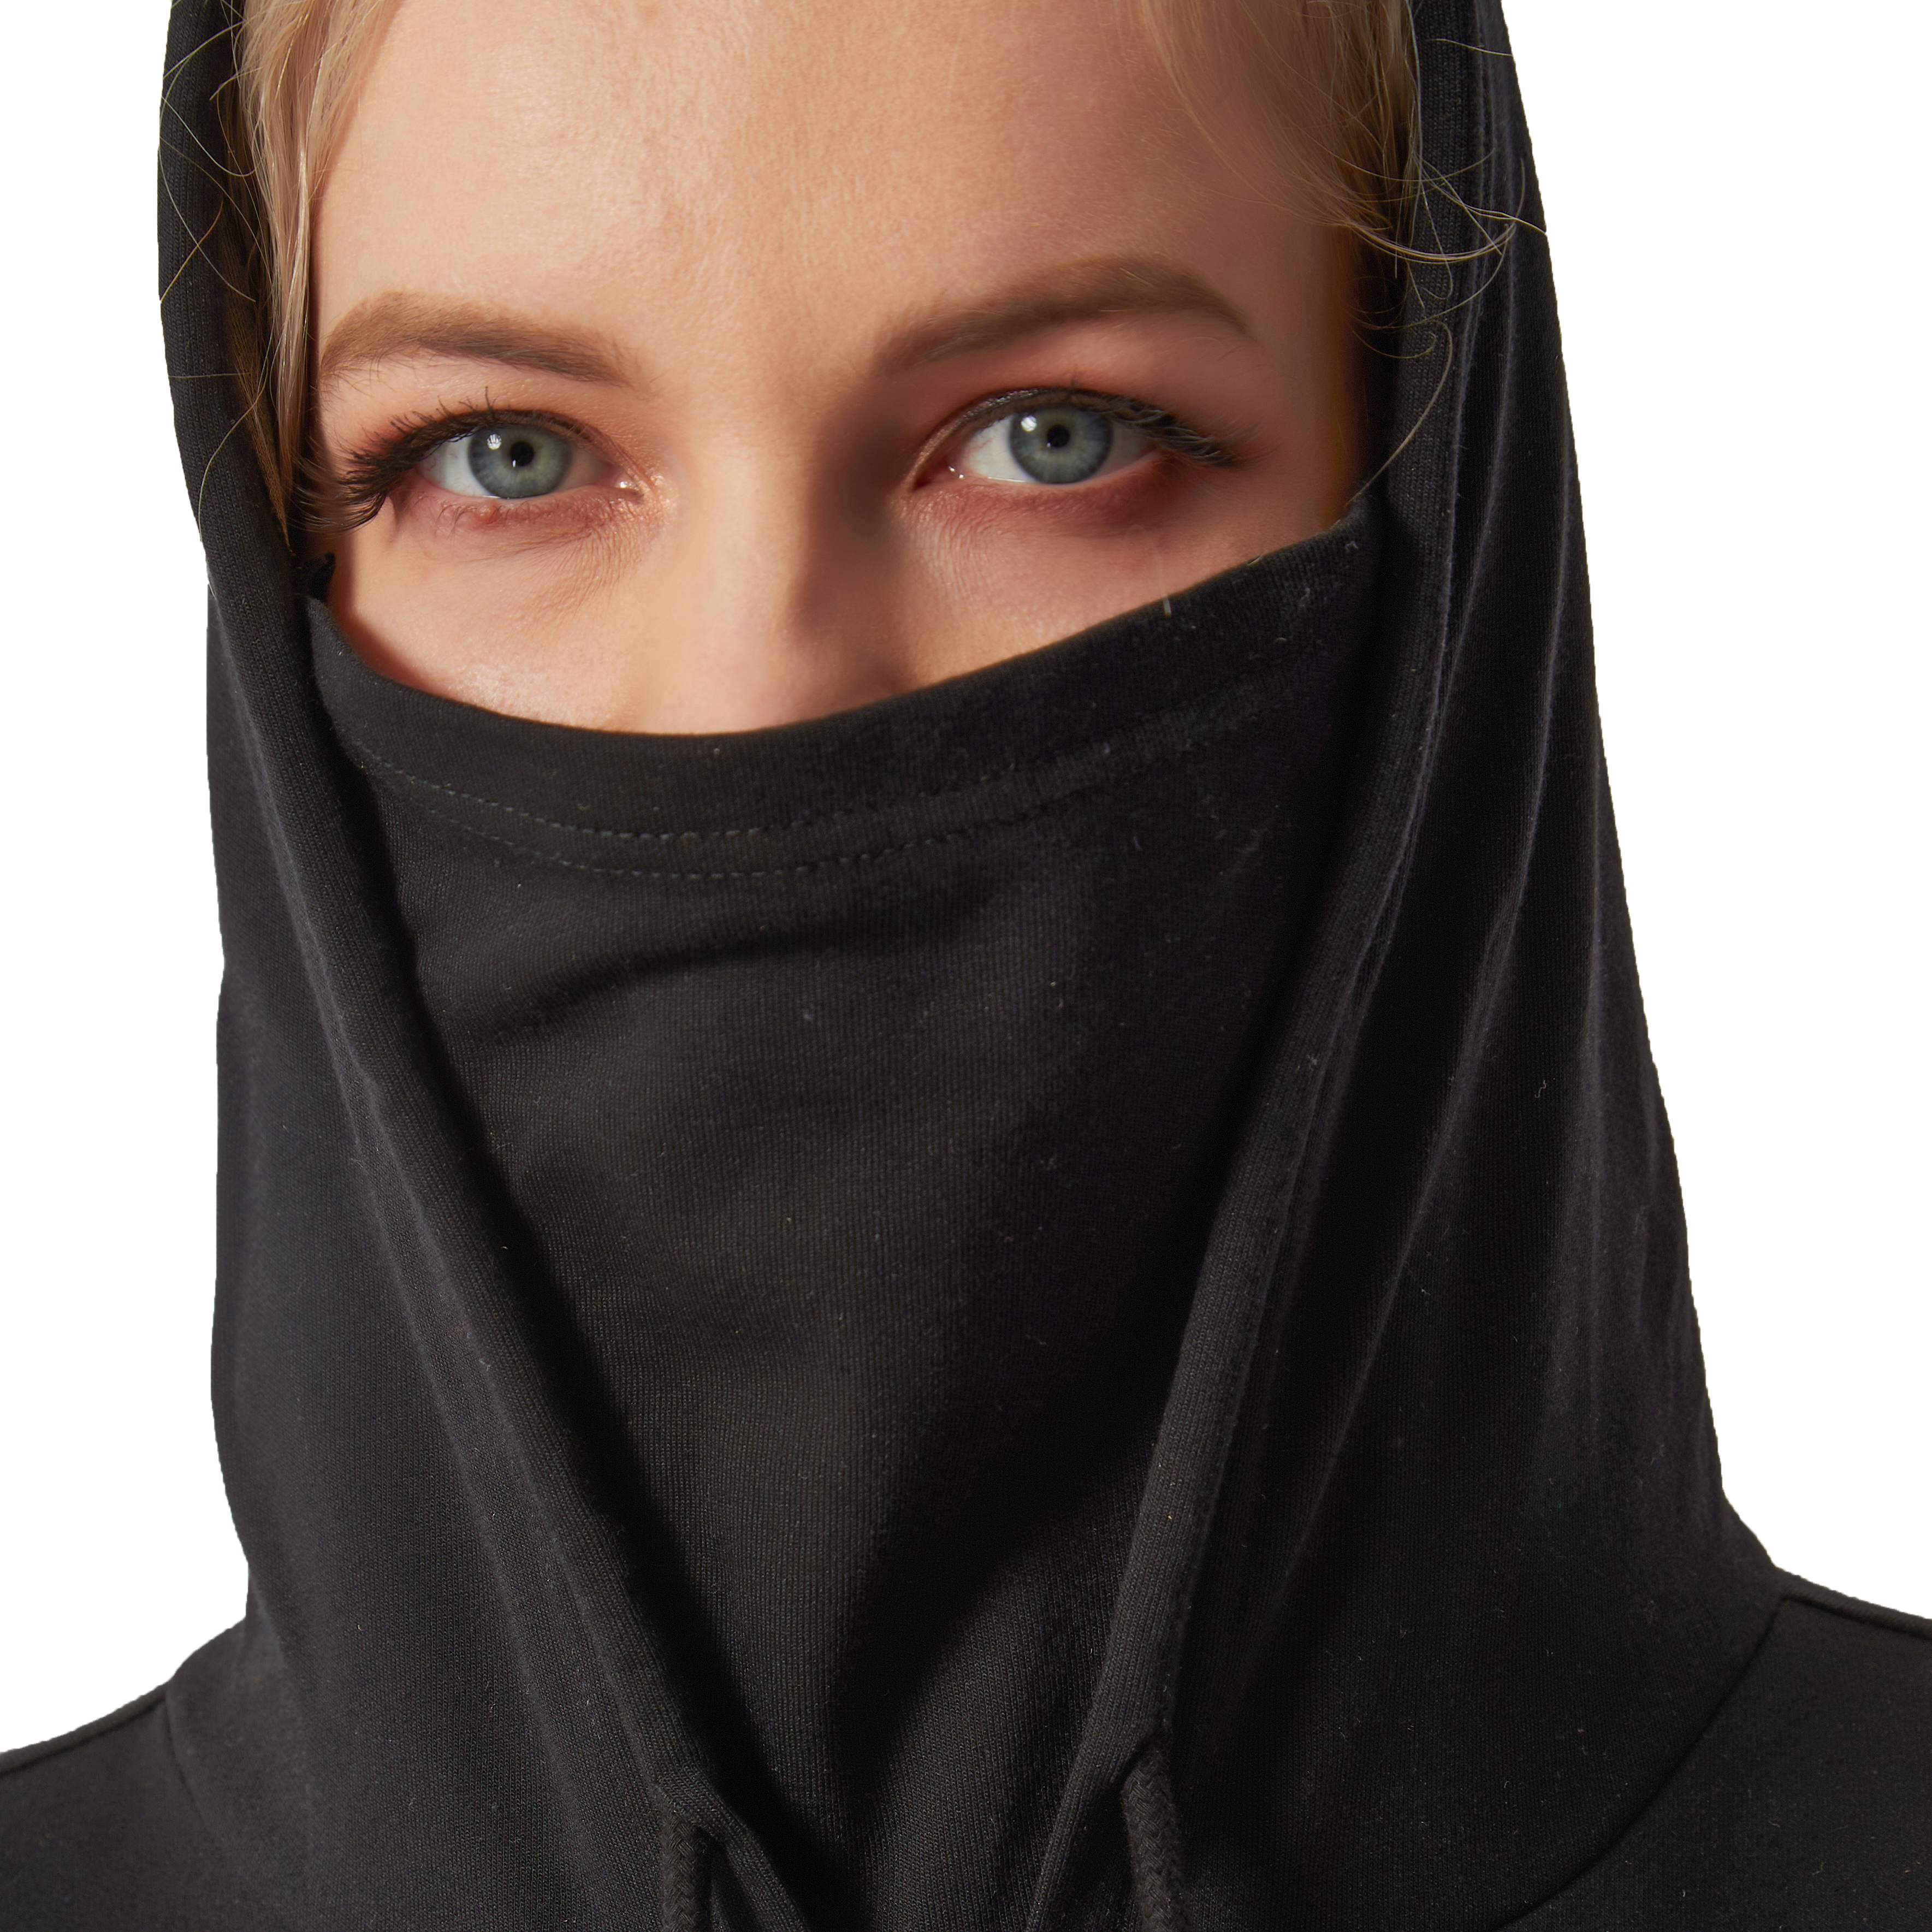  Hooded electromagnetic wave shielding protective sweater with face mask